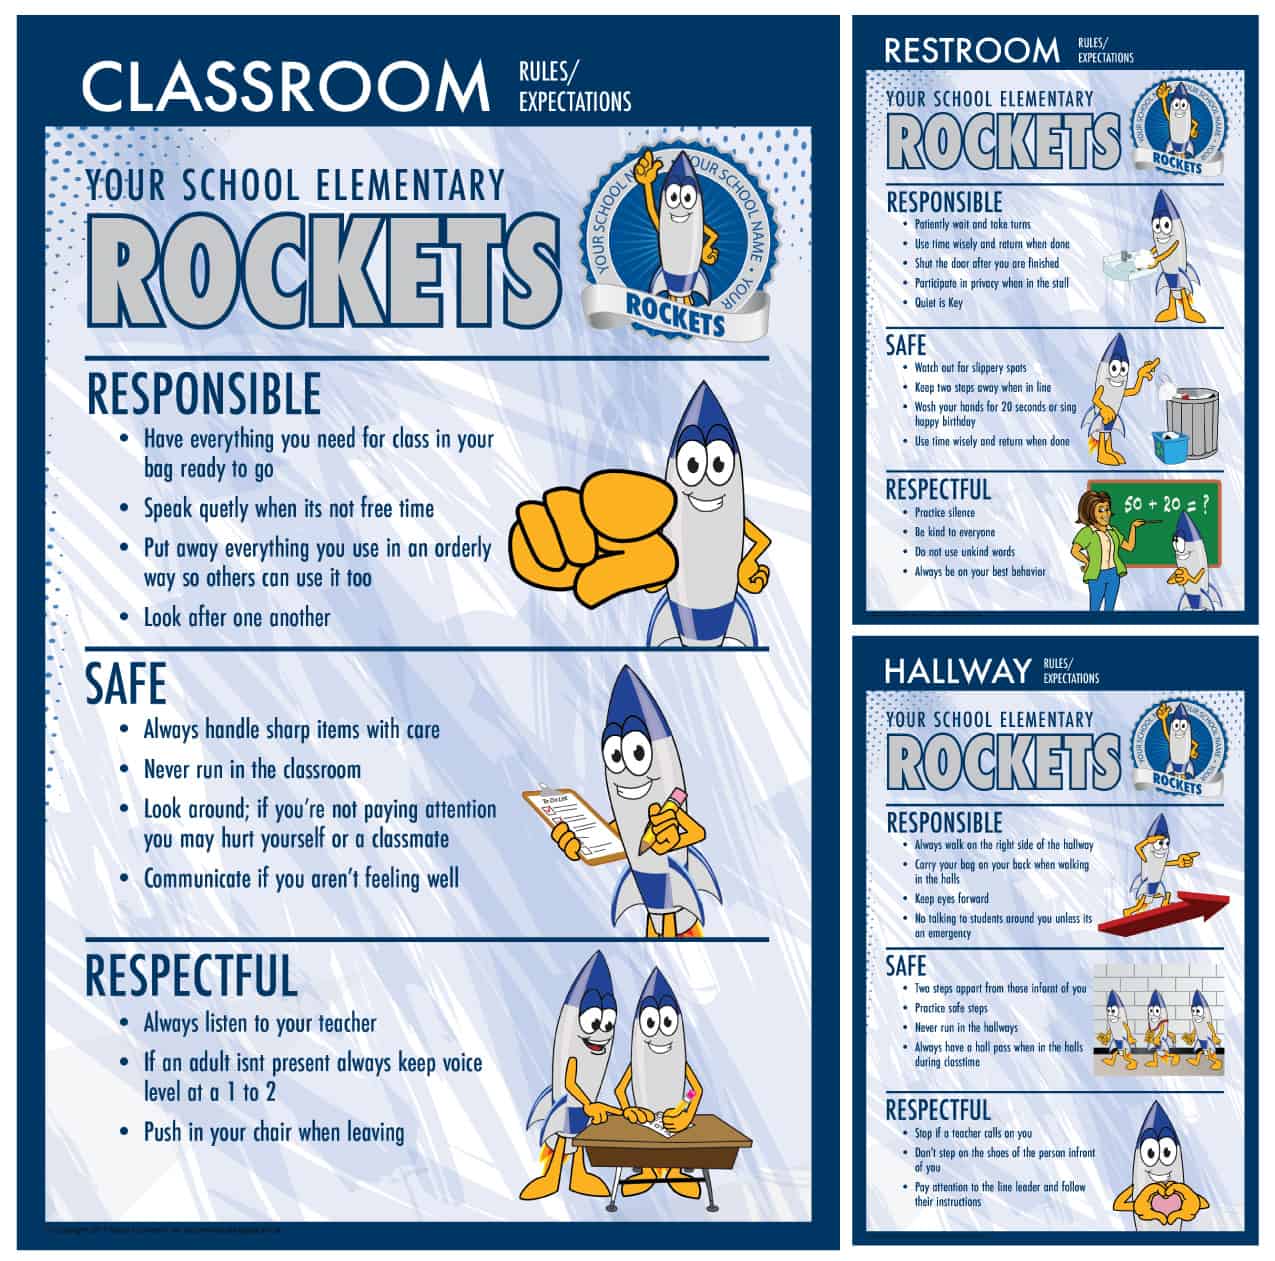 Rules-poster-rocket